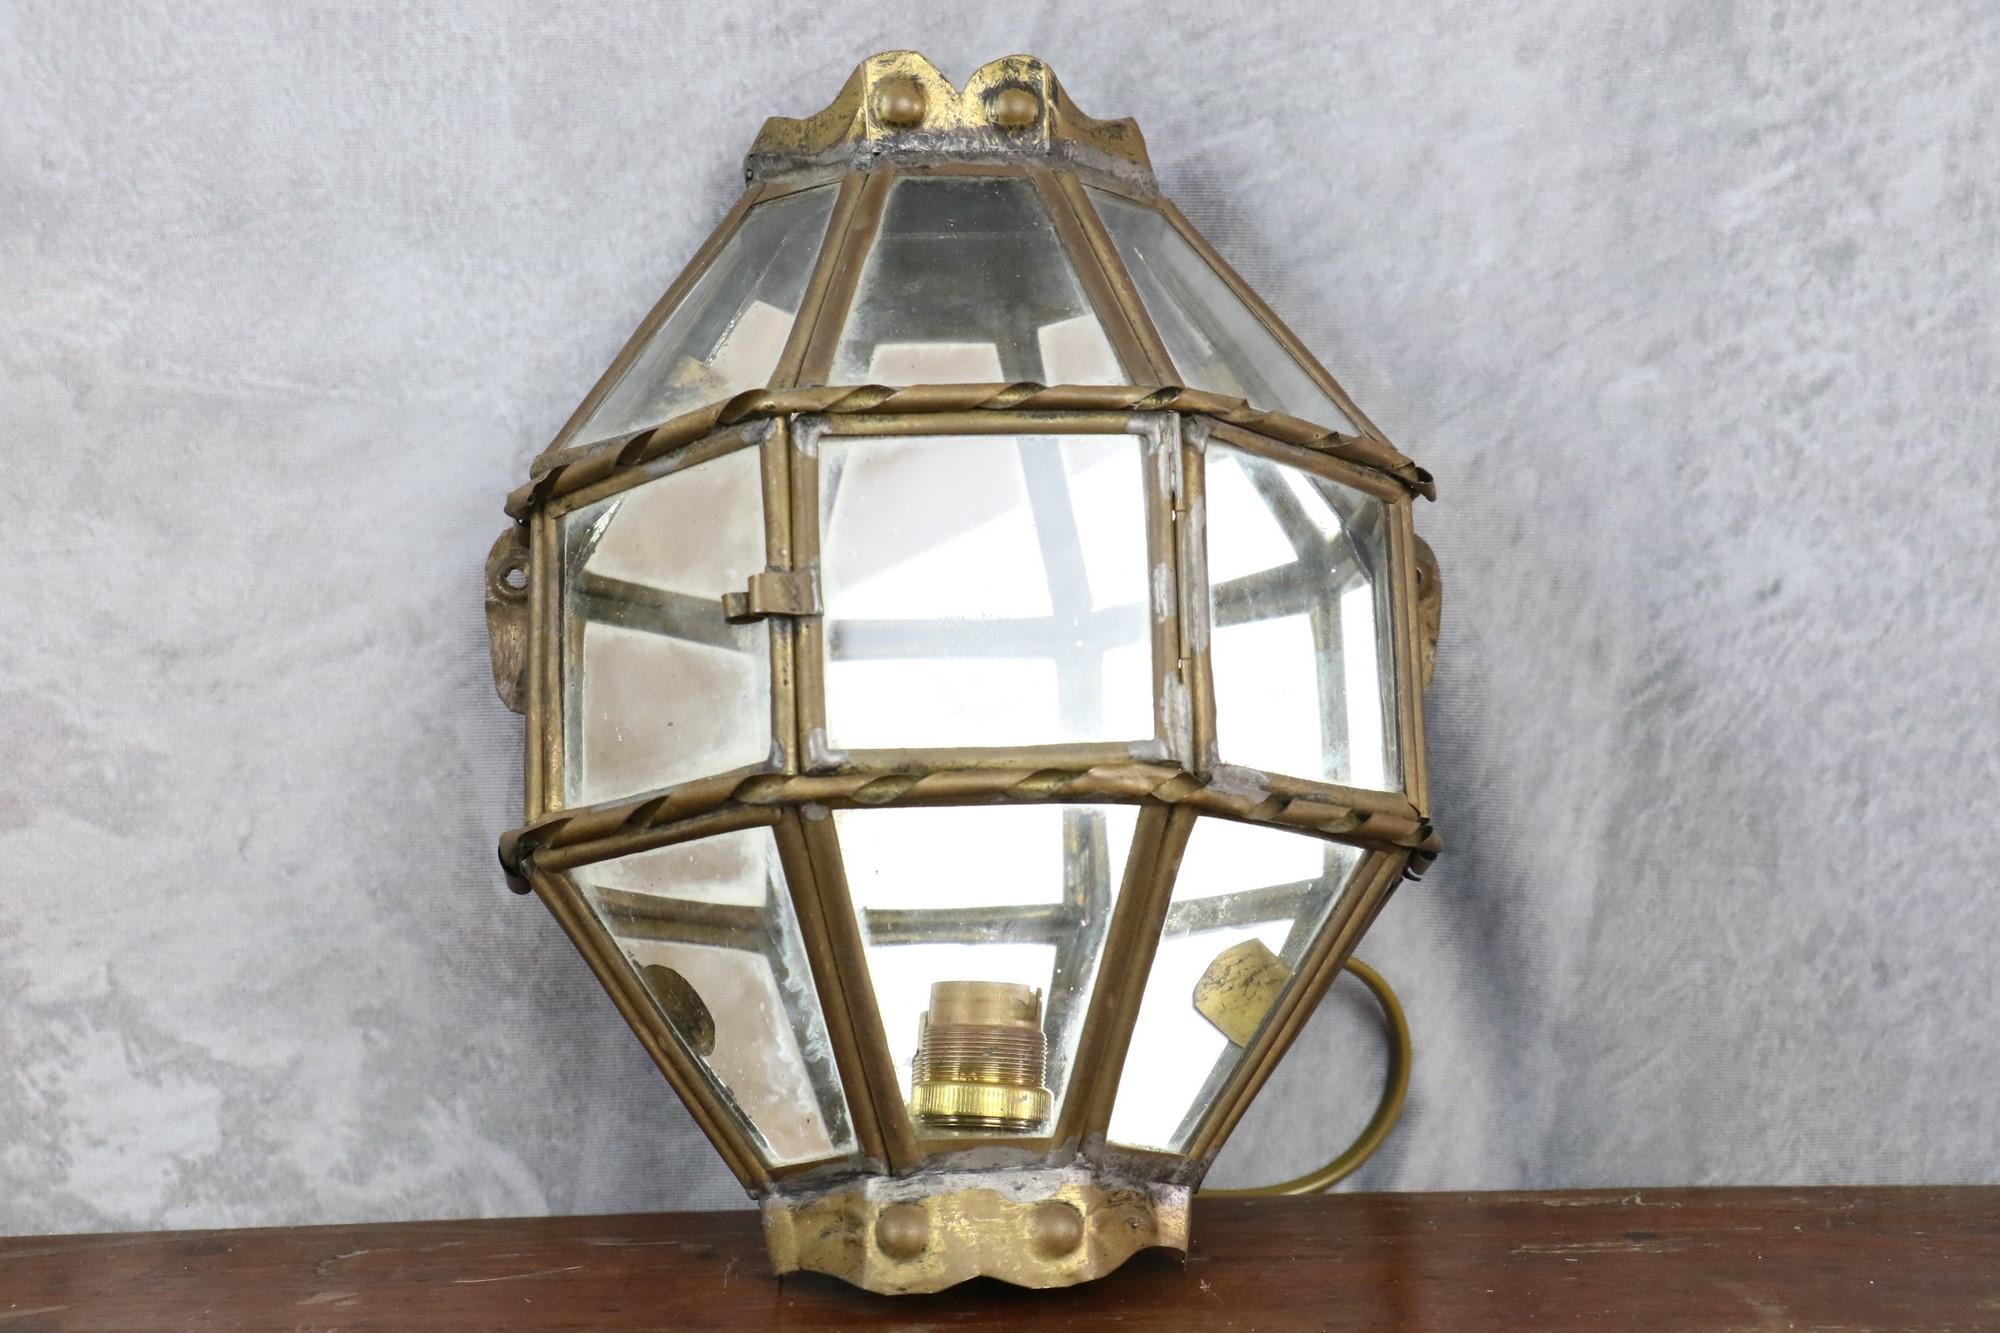 French Trio of Brass and Glass Vintage Handcrafted Lantern Wall Lamps, 1940s, France